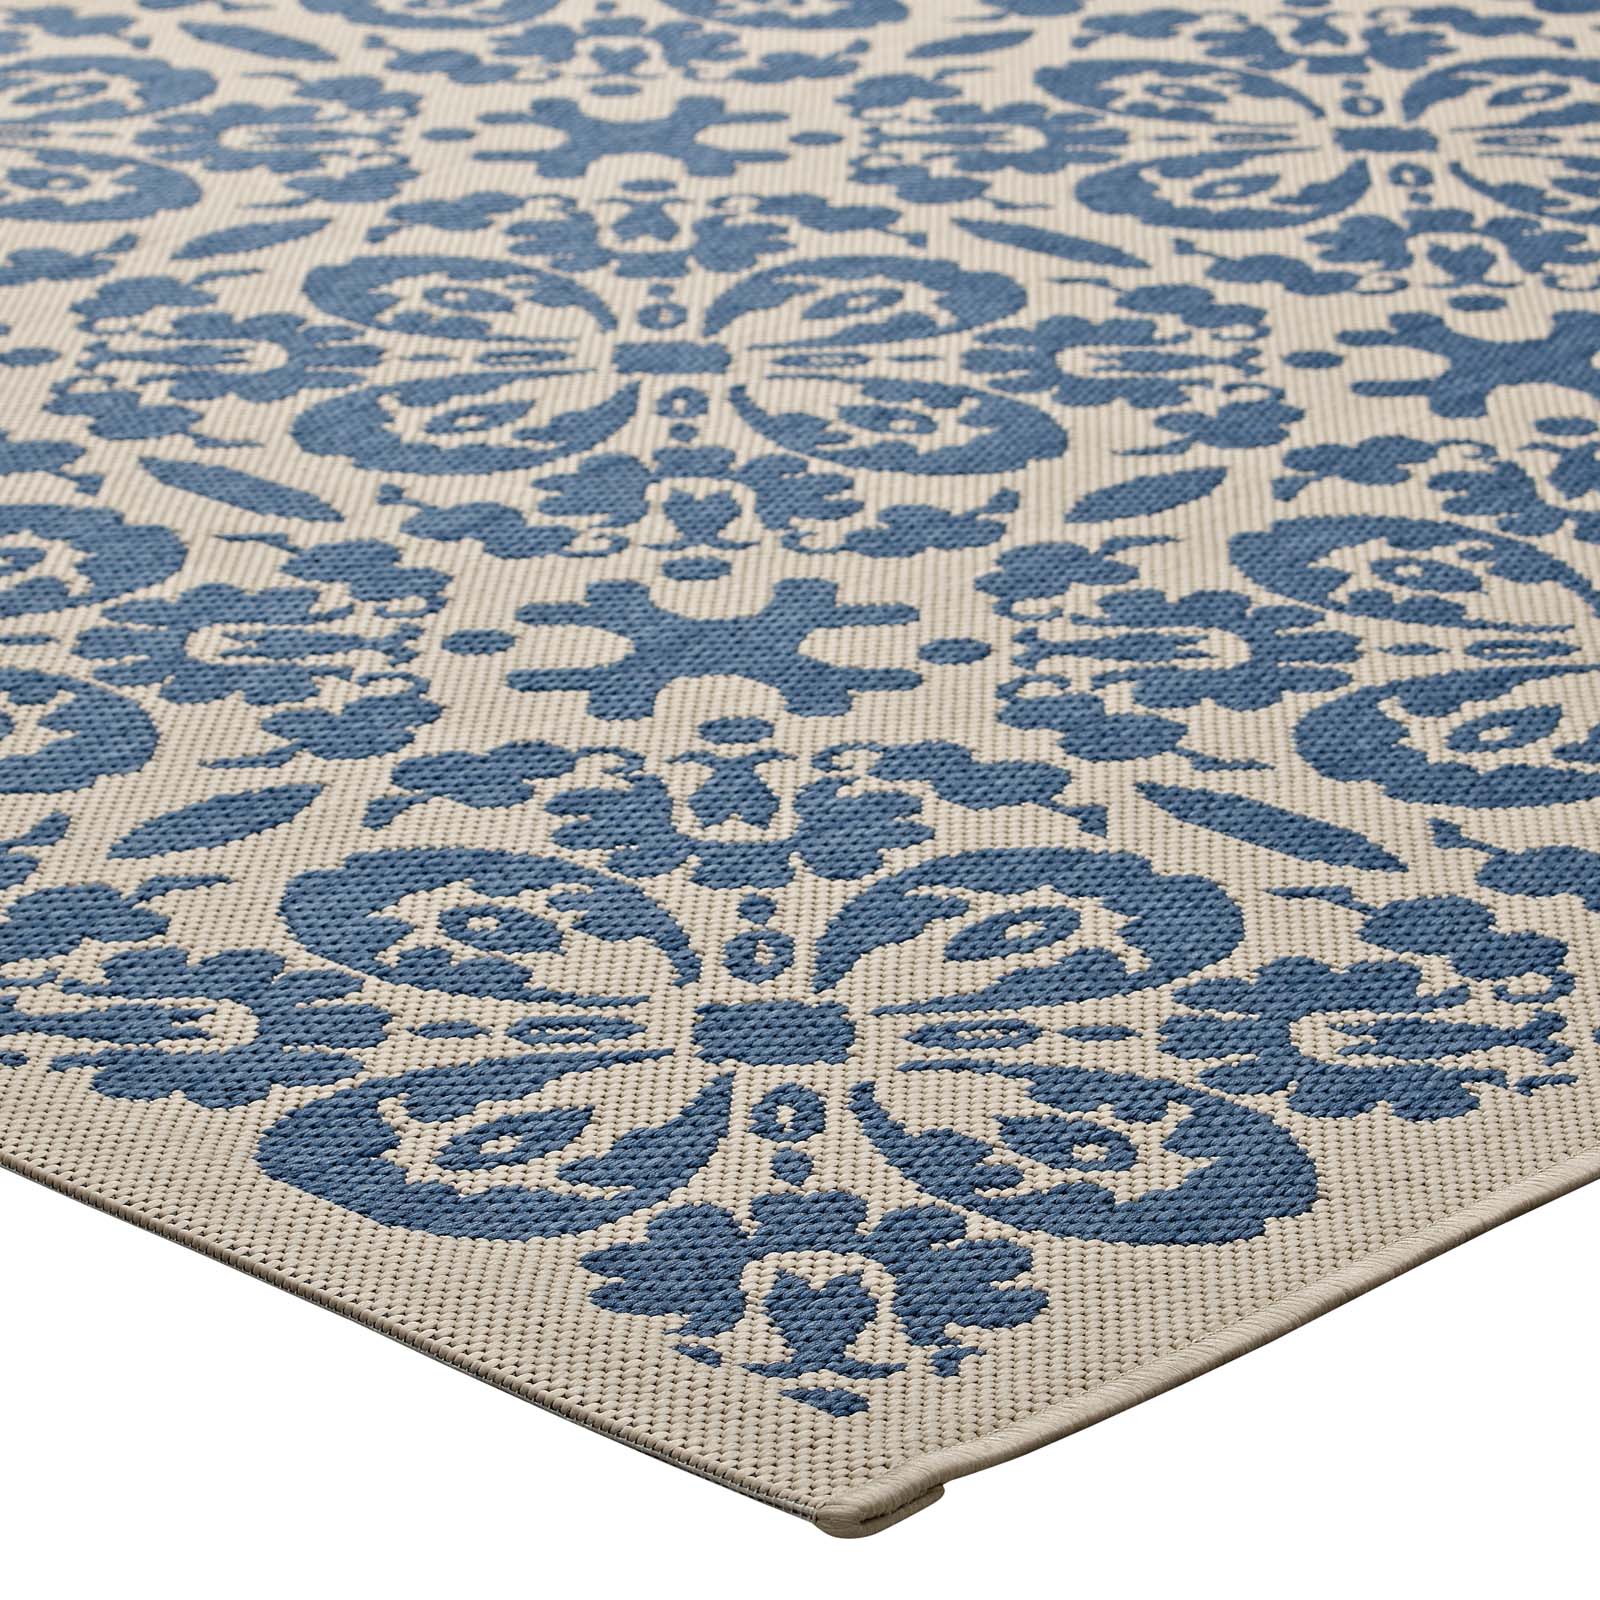 Modway Outdoor Rugs - Ariana Vintage Floral Trellis 8'x10' Outdoor Area Rug Blue & Beige